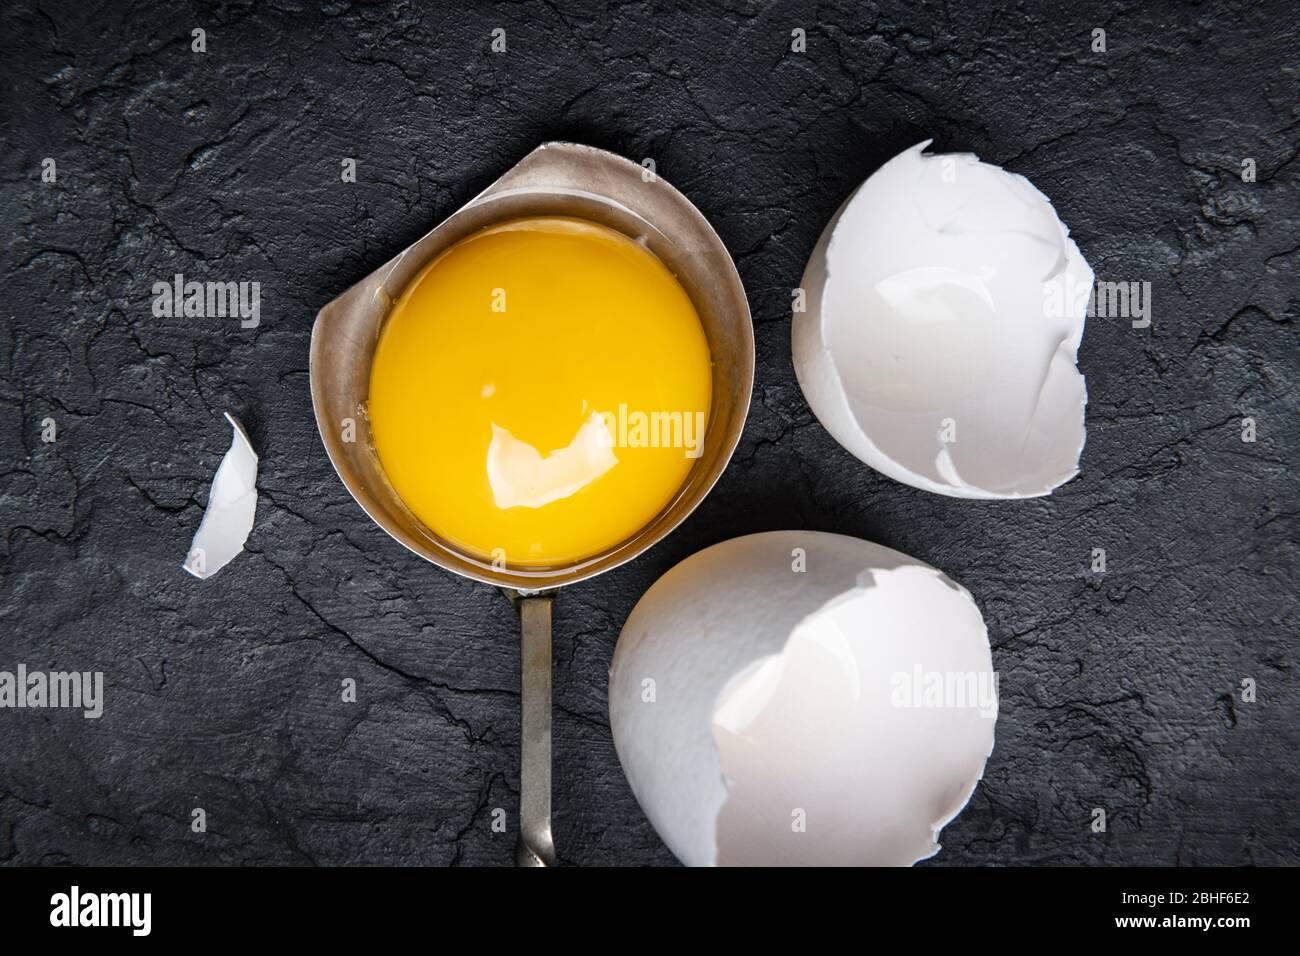 Chicken yolk from broken organic egg in silver spoon on black concrete background. Food photography Stock Photo